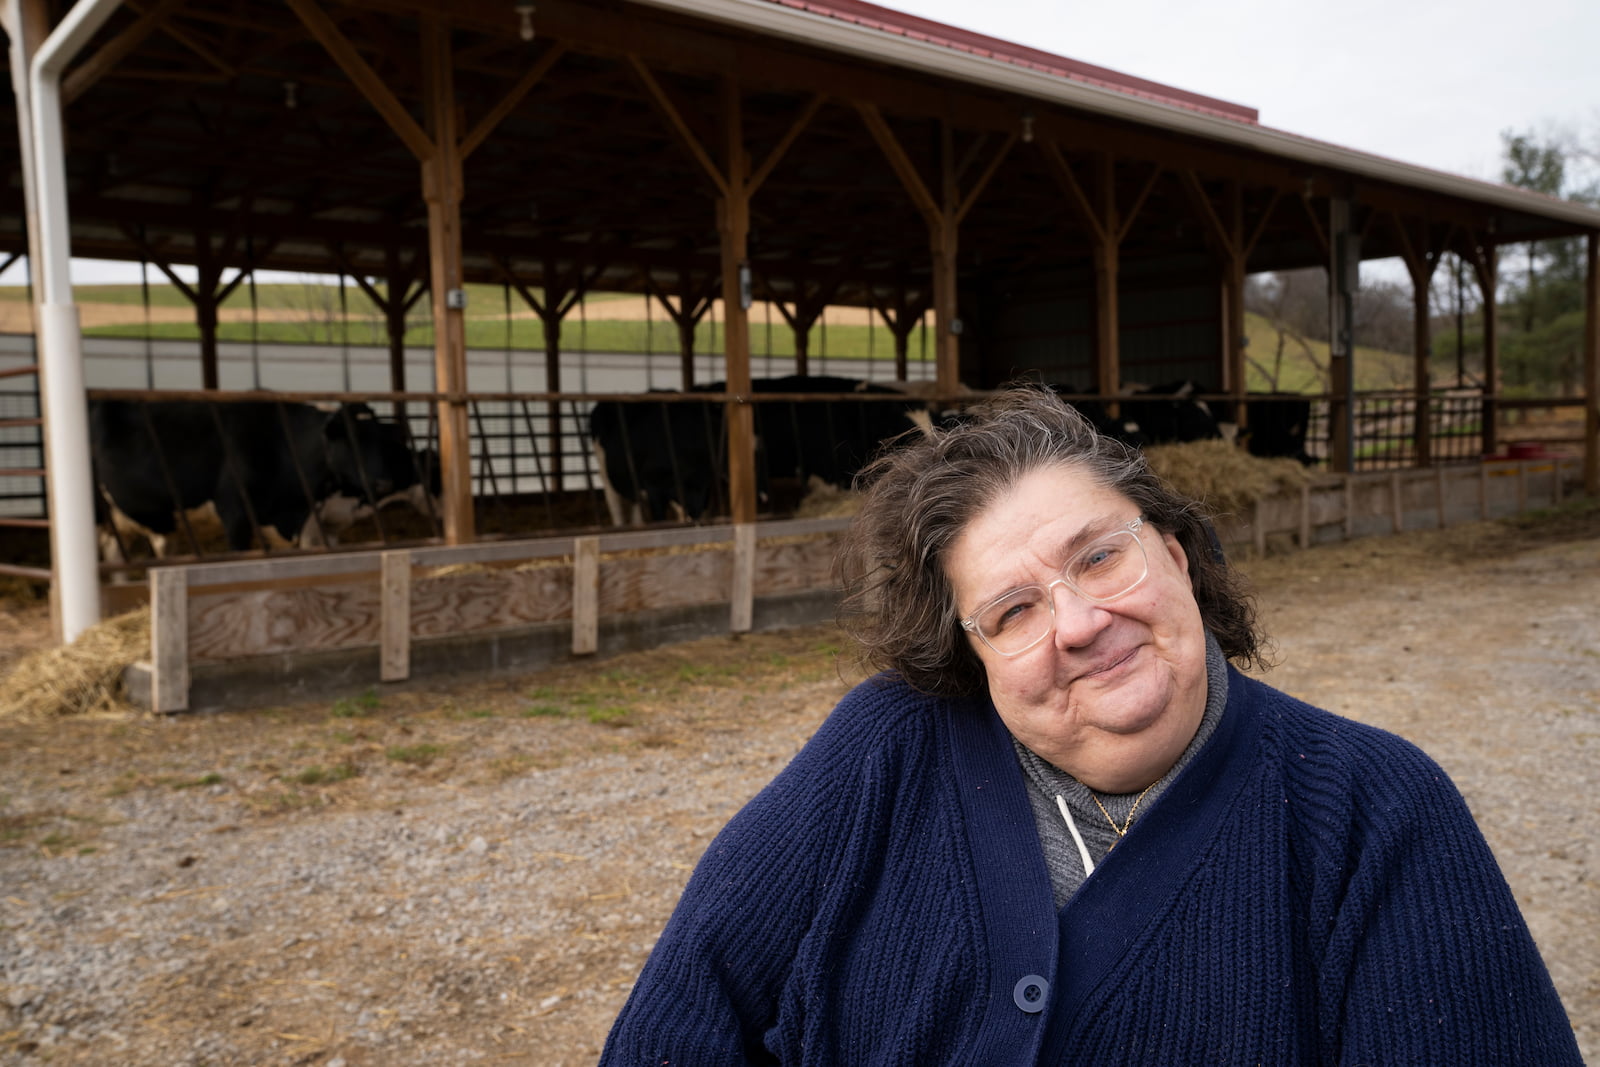 Cindy, smiling, outdoors near a cow shed